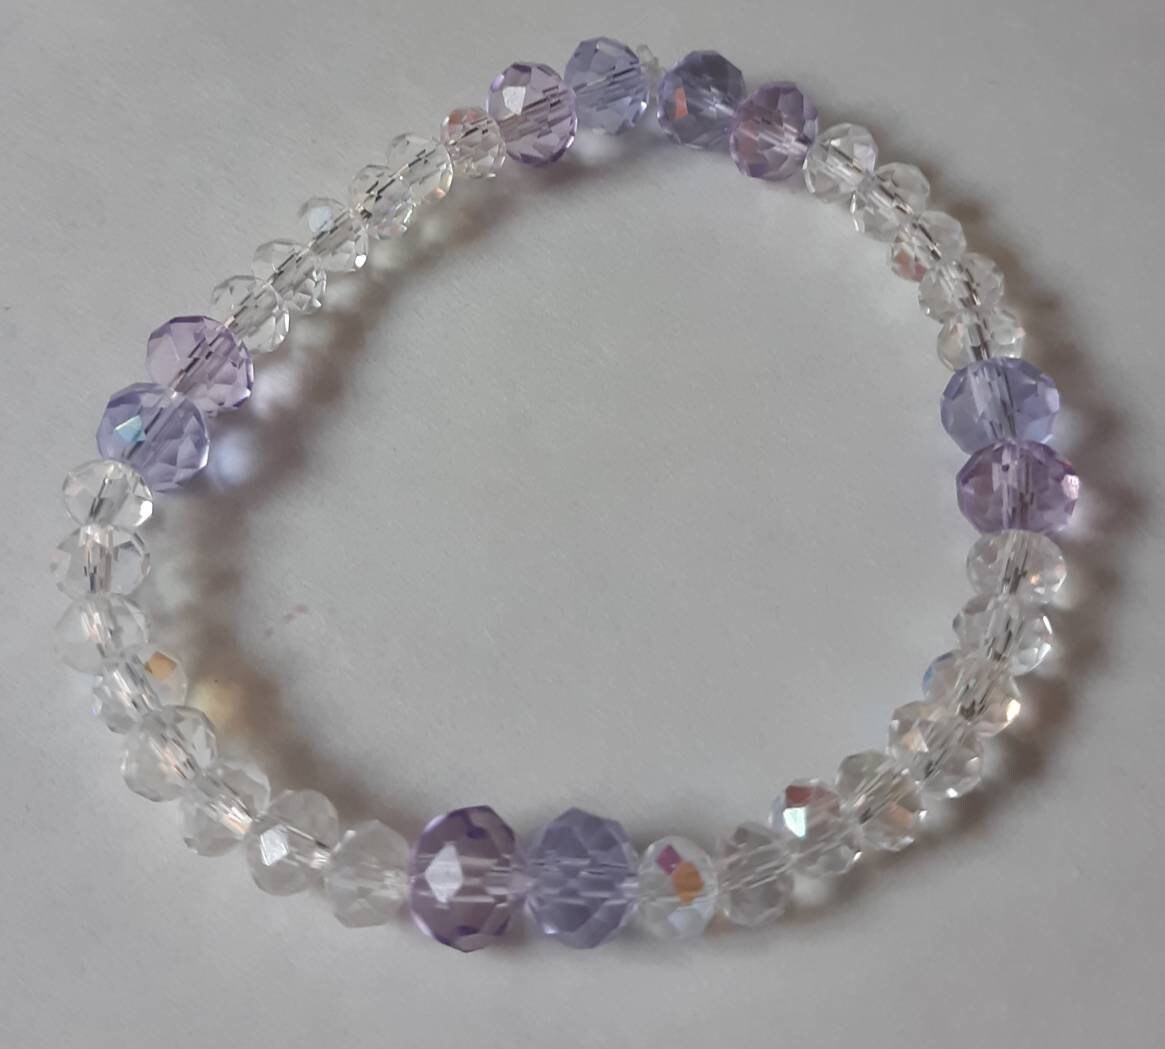 Sparkly Clear and purple beaded bracelet.